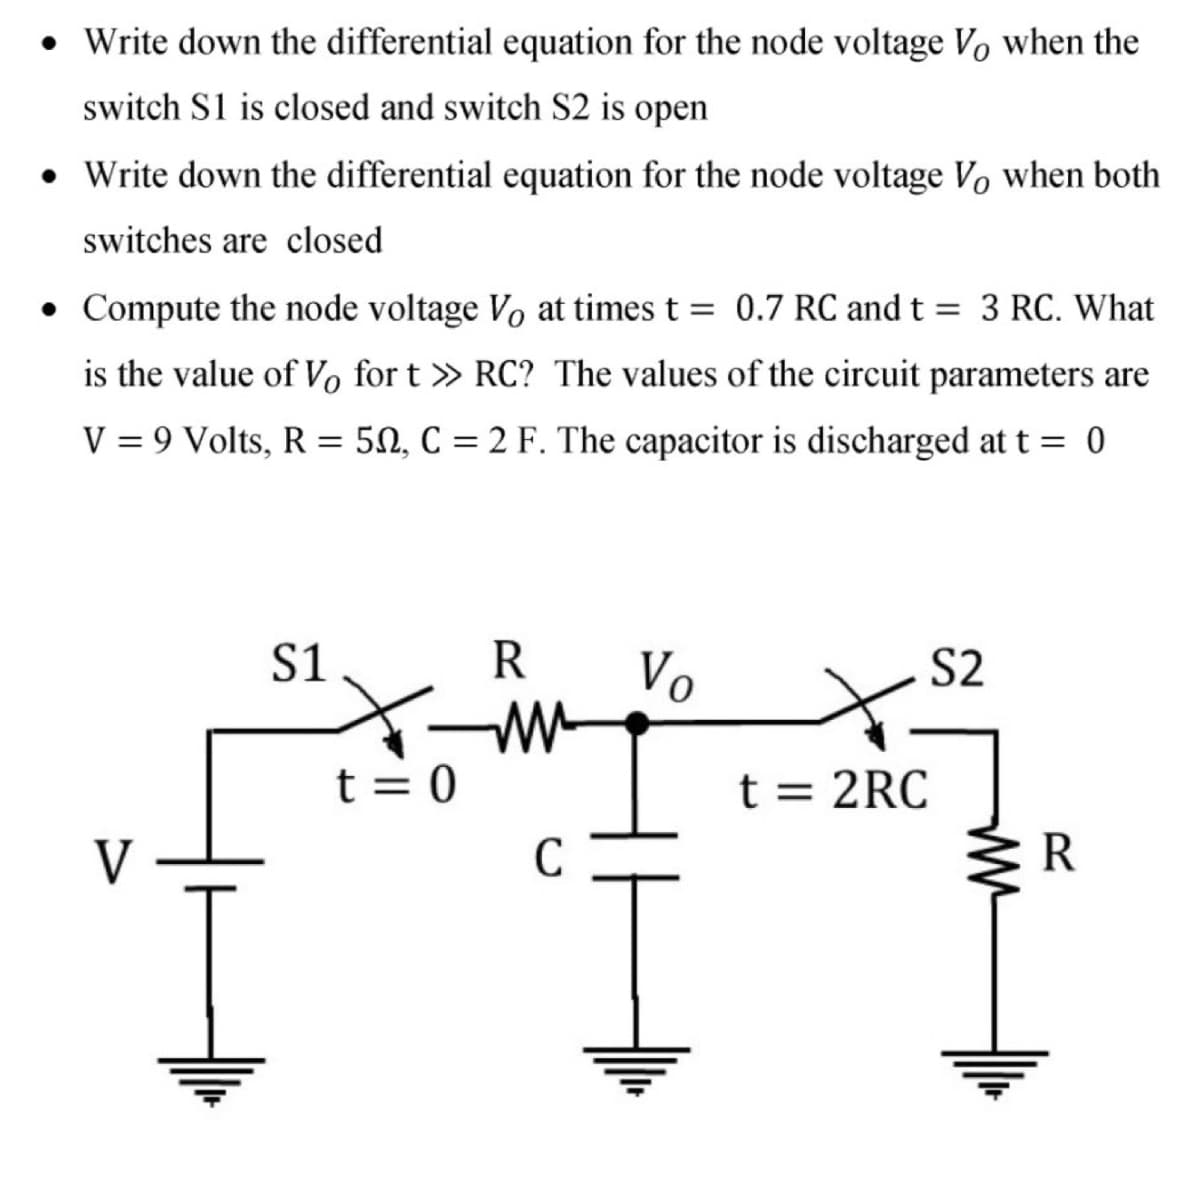 • Write down the differential equation for the node voltage Vo when the
switch S1 is closed and switch S2 is open
• Write down the differential equation for the node voltage Vo when both
switches are closed
• Compute the node voltage Vo at times t = 0.7 RC and t = 3 RC. What
is the value of Vo for t » RC? The values of the circuit parameters are
V = 9 Volts, R
50, C = 2 F. The capacitor is discharged at t = 0
S1
Vo
S2
t = 0
t = 2RC
V
C
R
